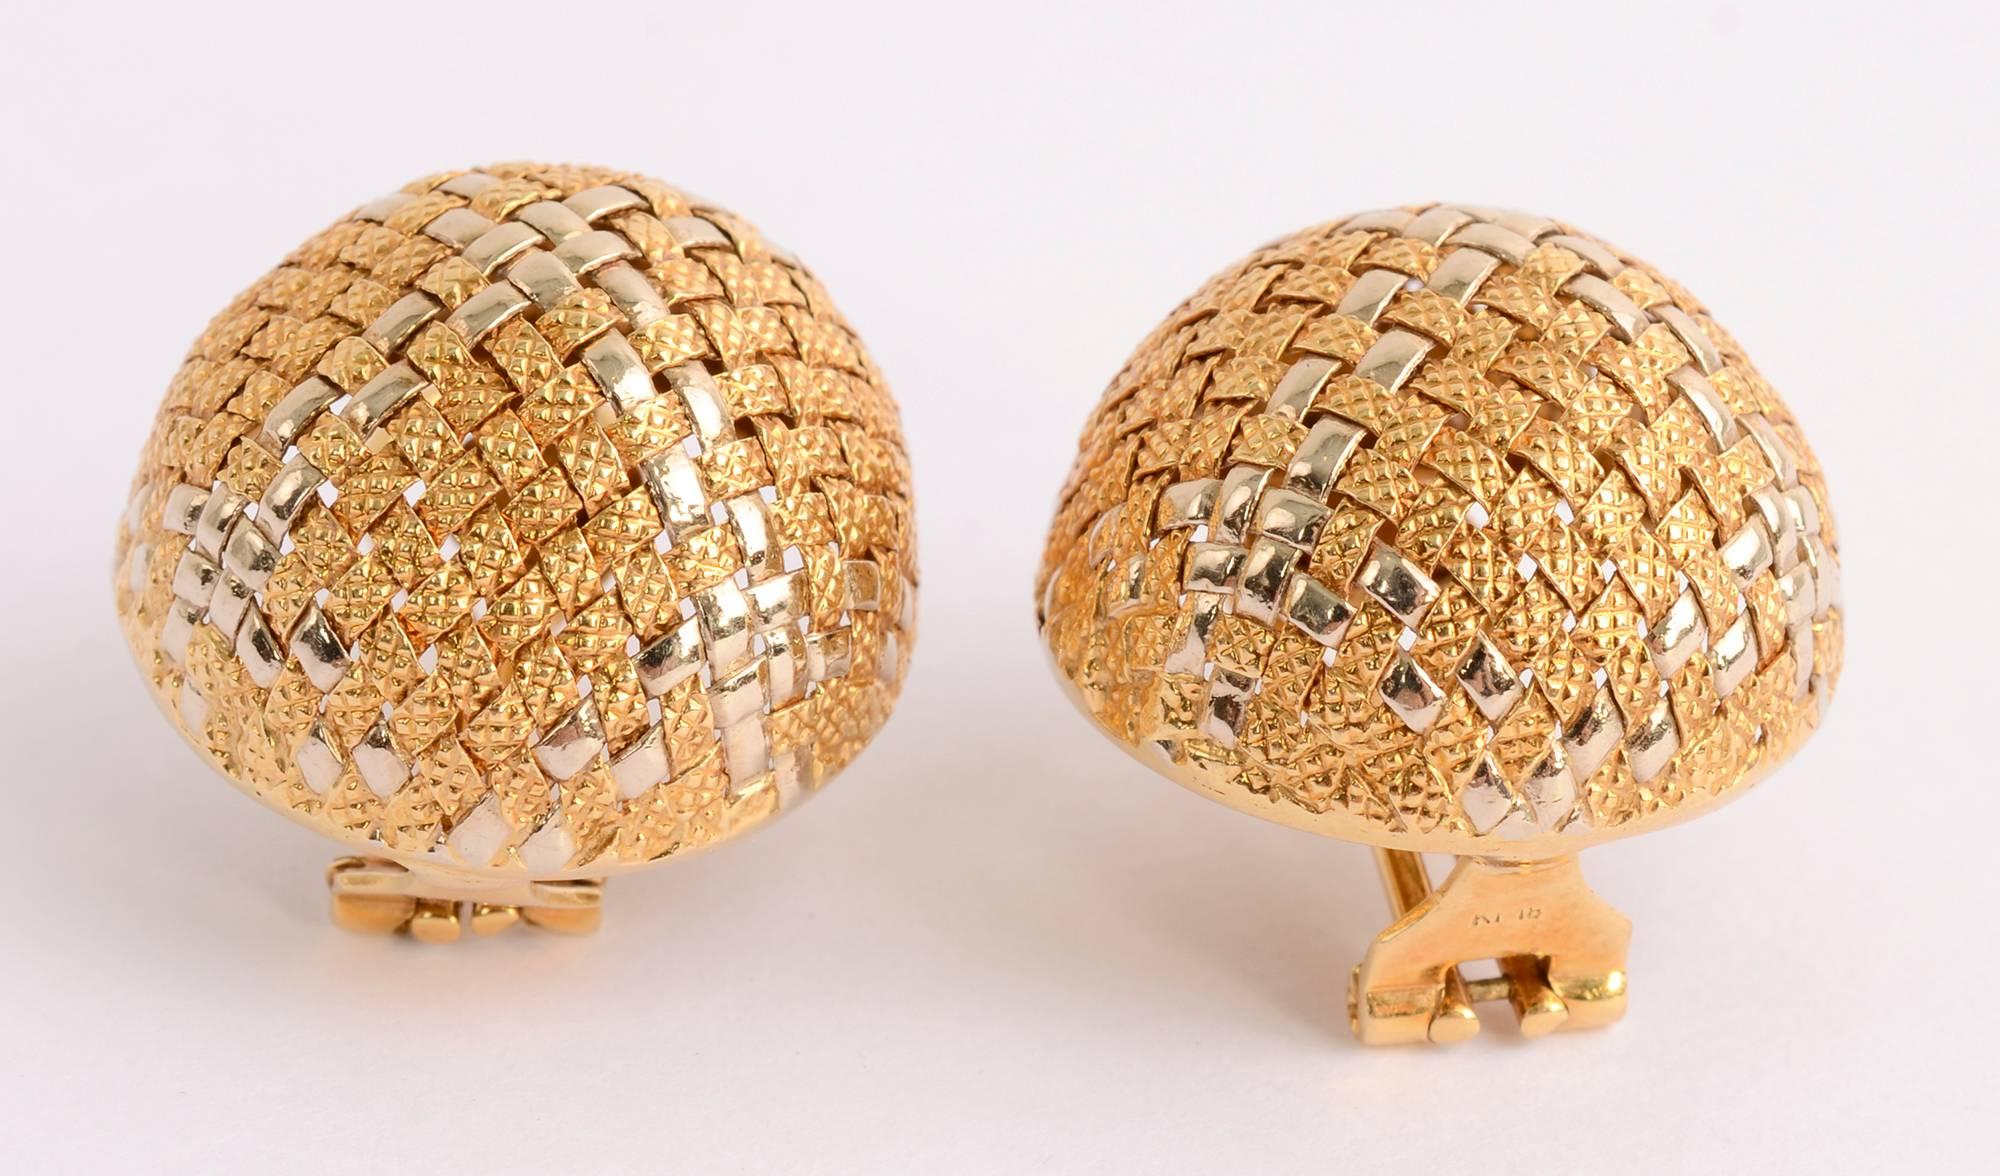 Finely woven dome shaped earrings with two different colors of gold. The glossy strips are a pale yellow while the textured strips are a slightly darker tone. The earrings measure 1 inch in diameter. Backs are posts and clips.